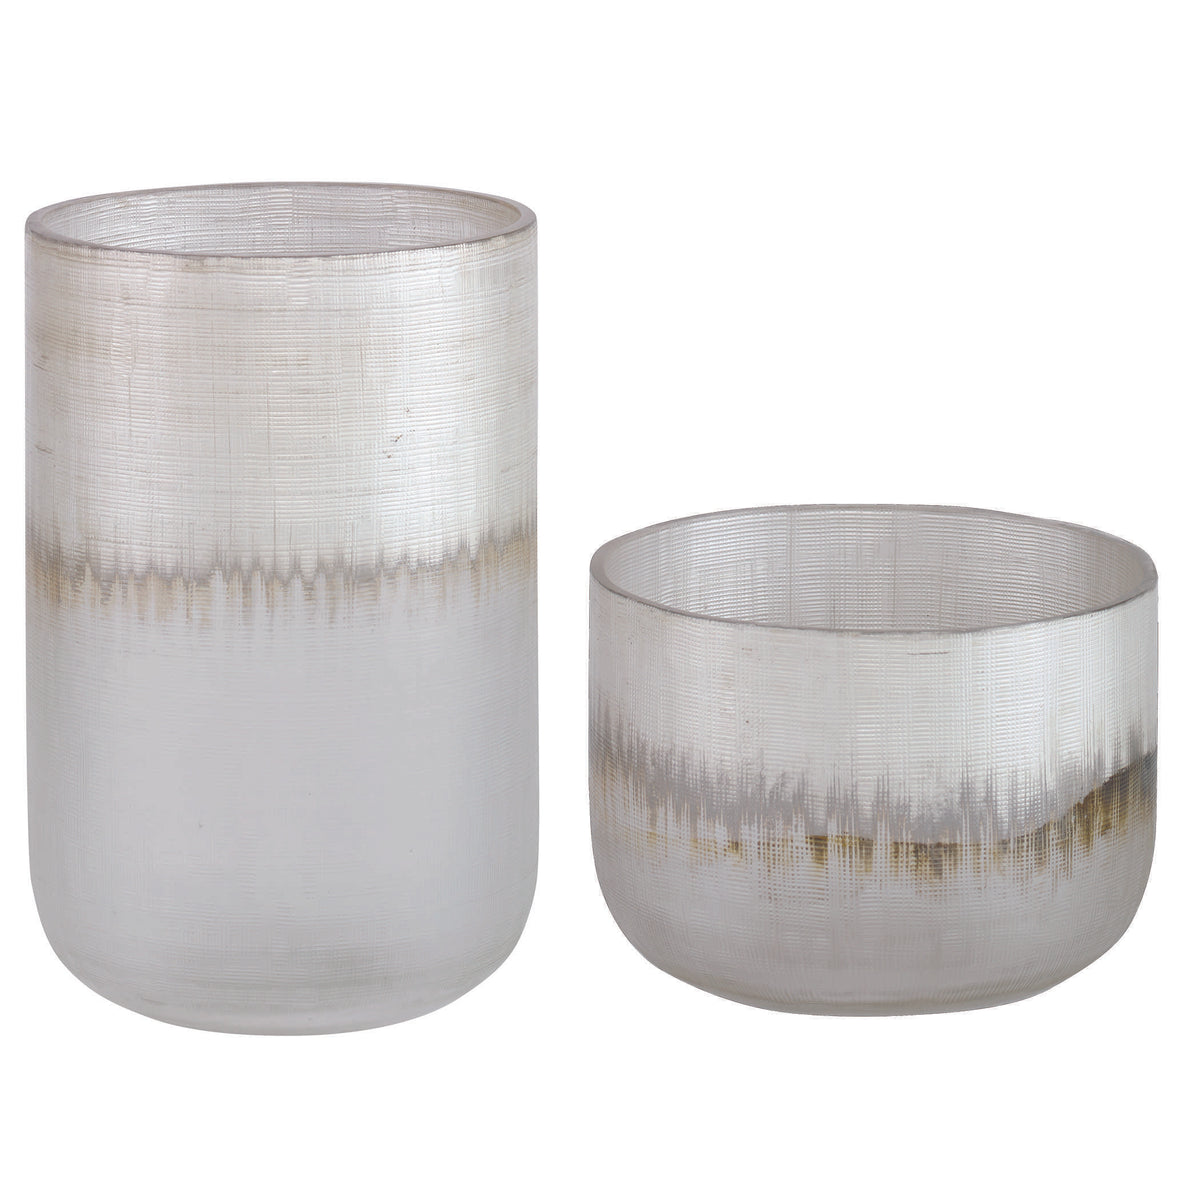 Frost Vases, set of 2